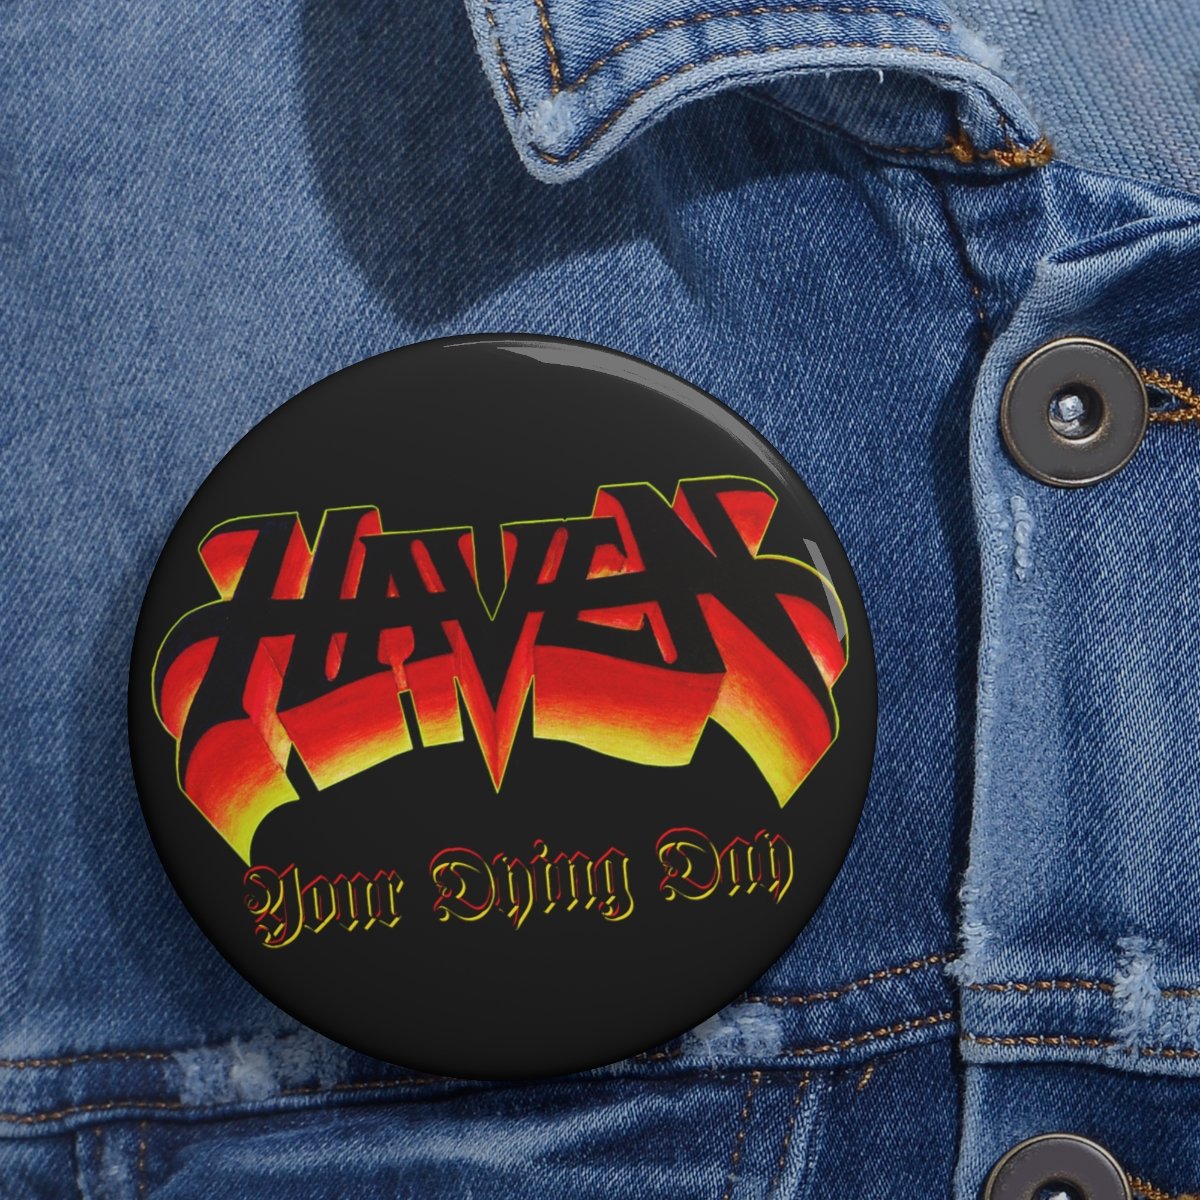 Haven – Your Dying Day Logo Pin Buttons